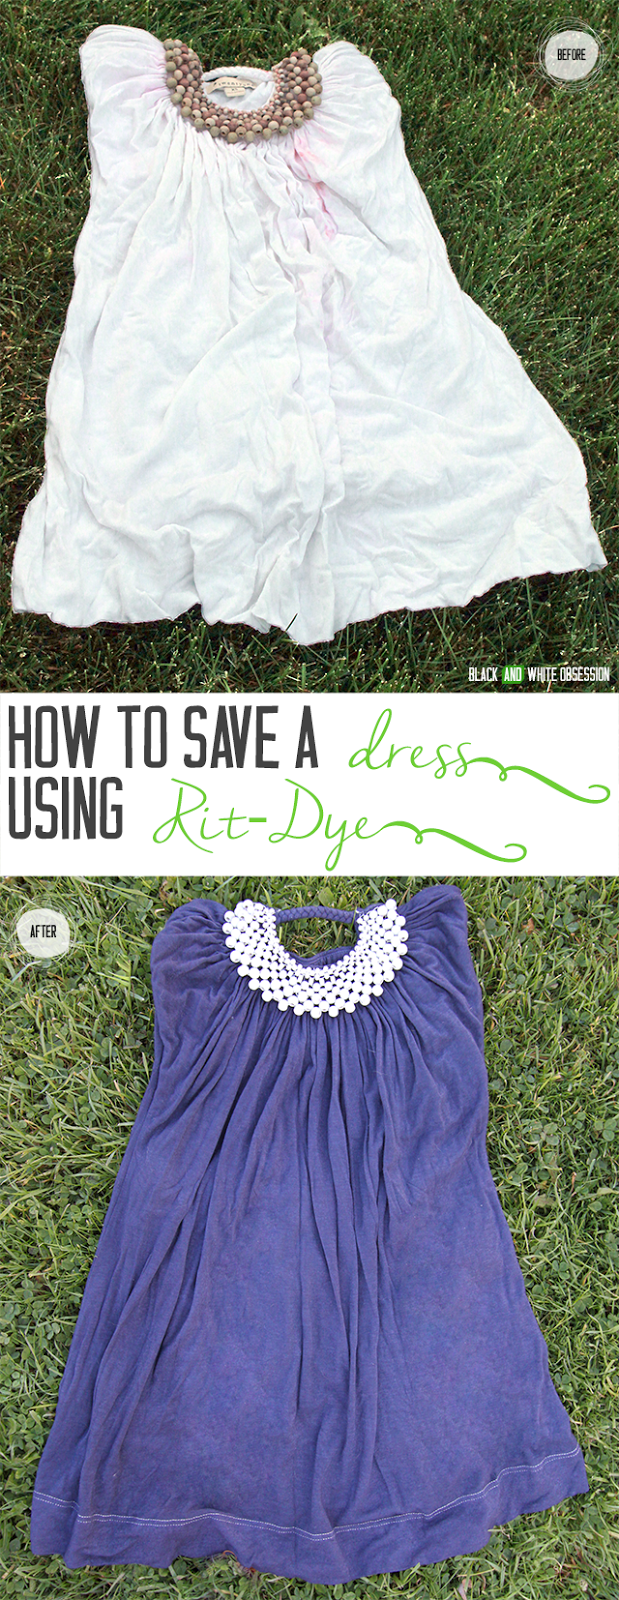 Black and White Obsession: How to Save Clothing using Rit Dye